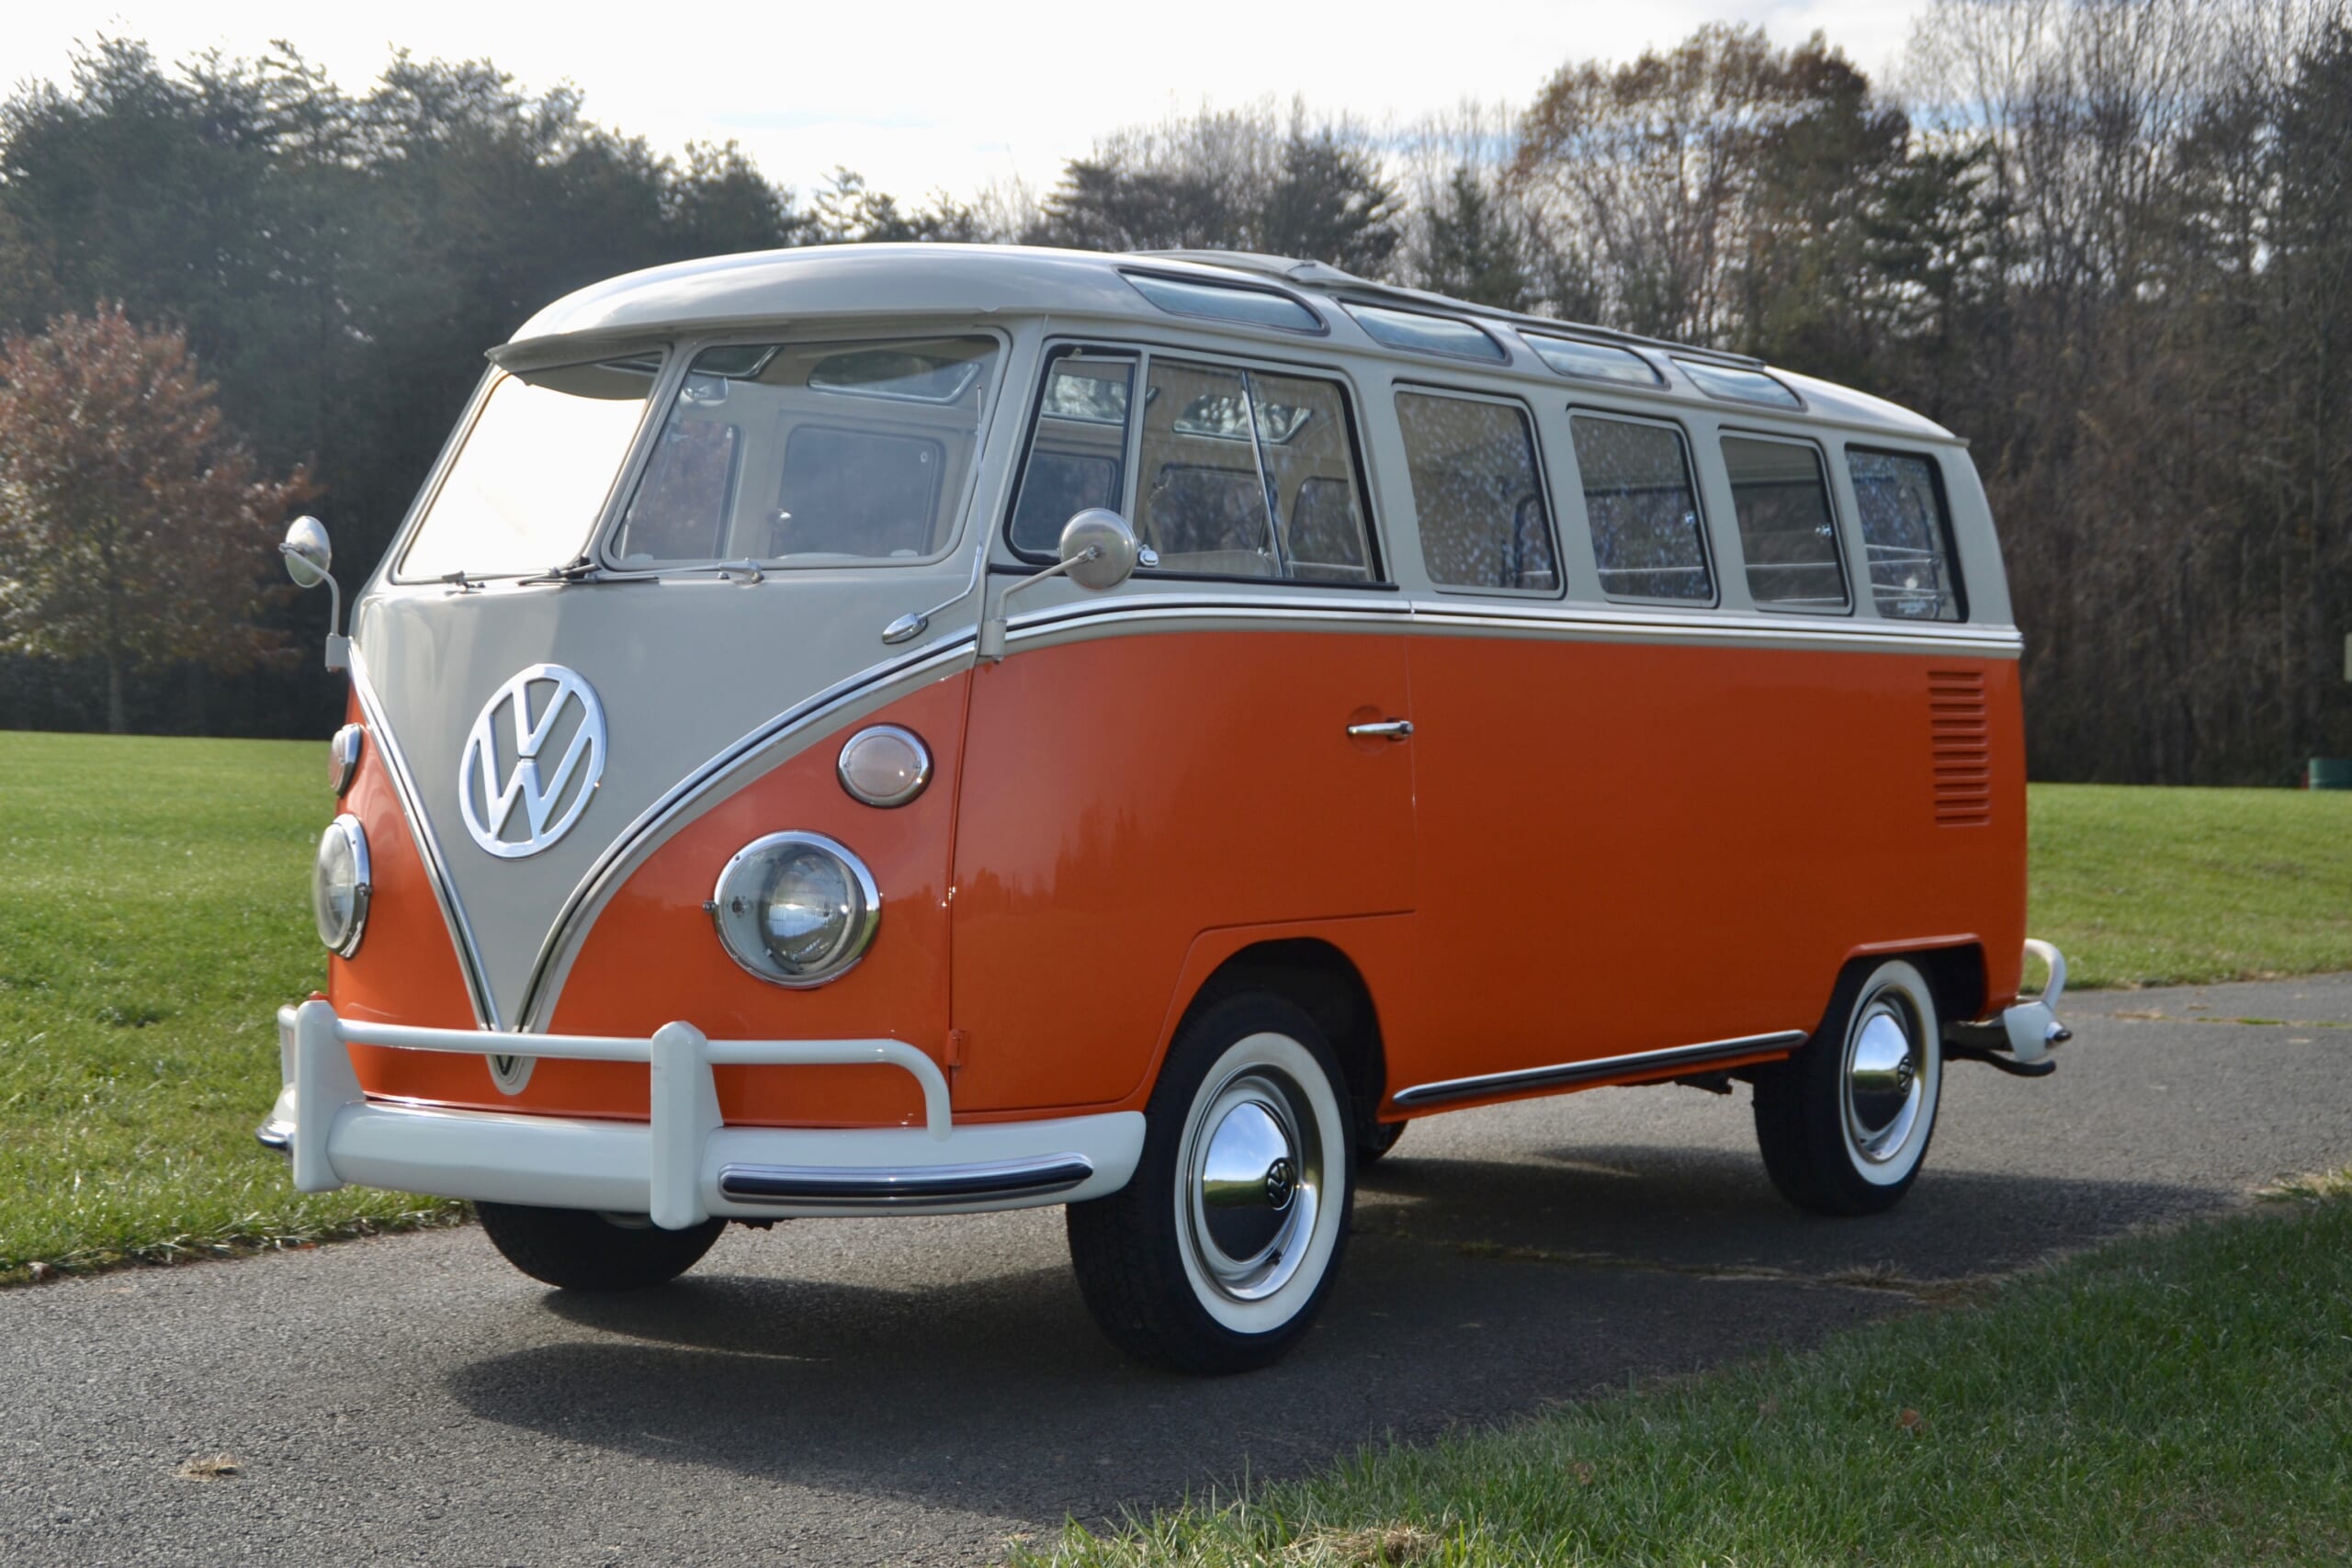 Bemyndigelse Nat sted ankel 8 Reasons Why the Classic VW Bus Is a Timeless Legend - Maxim